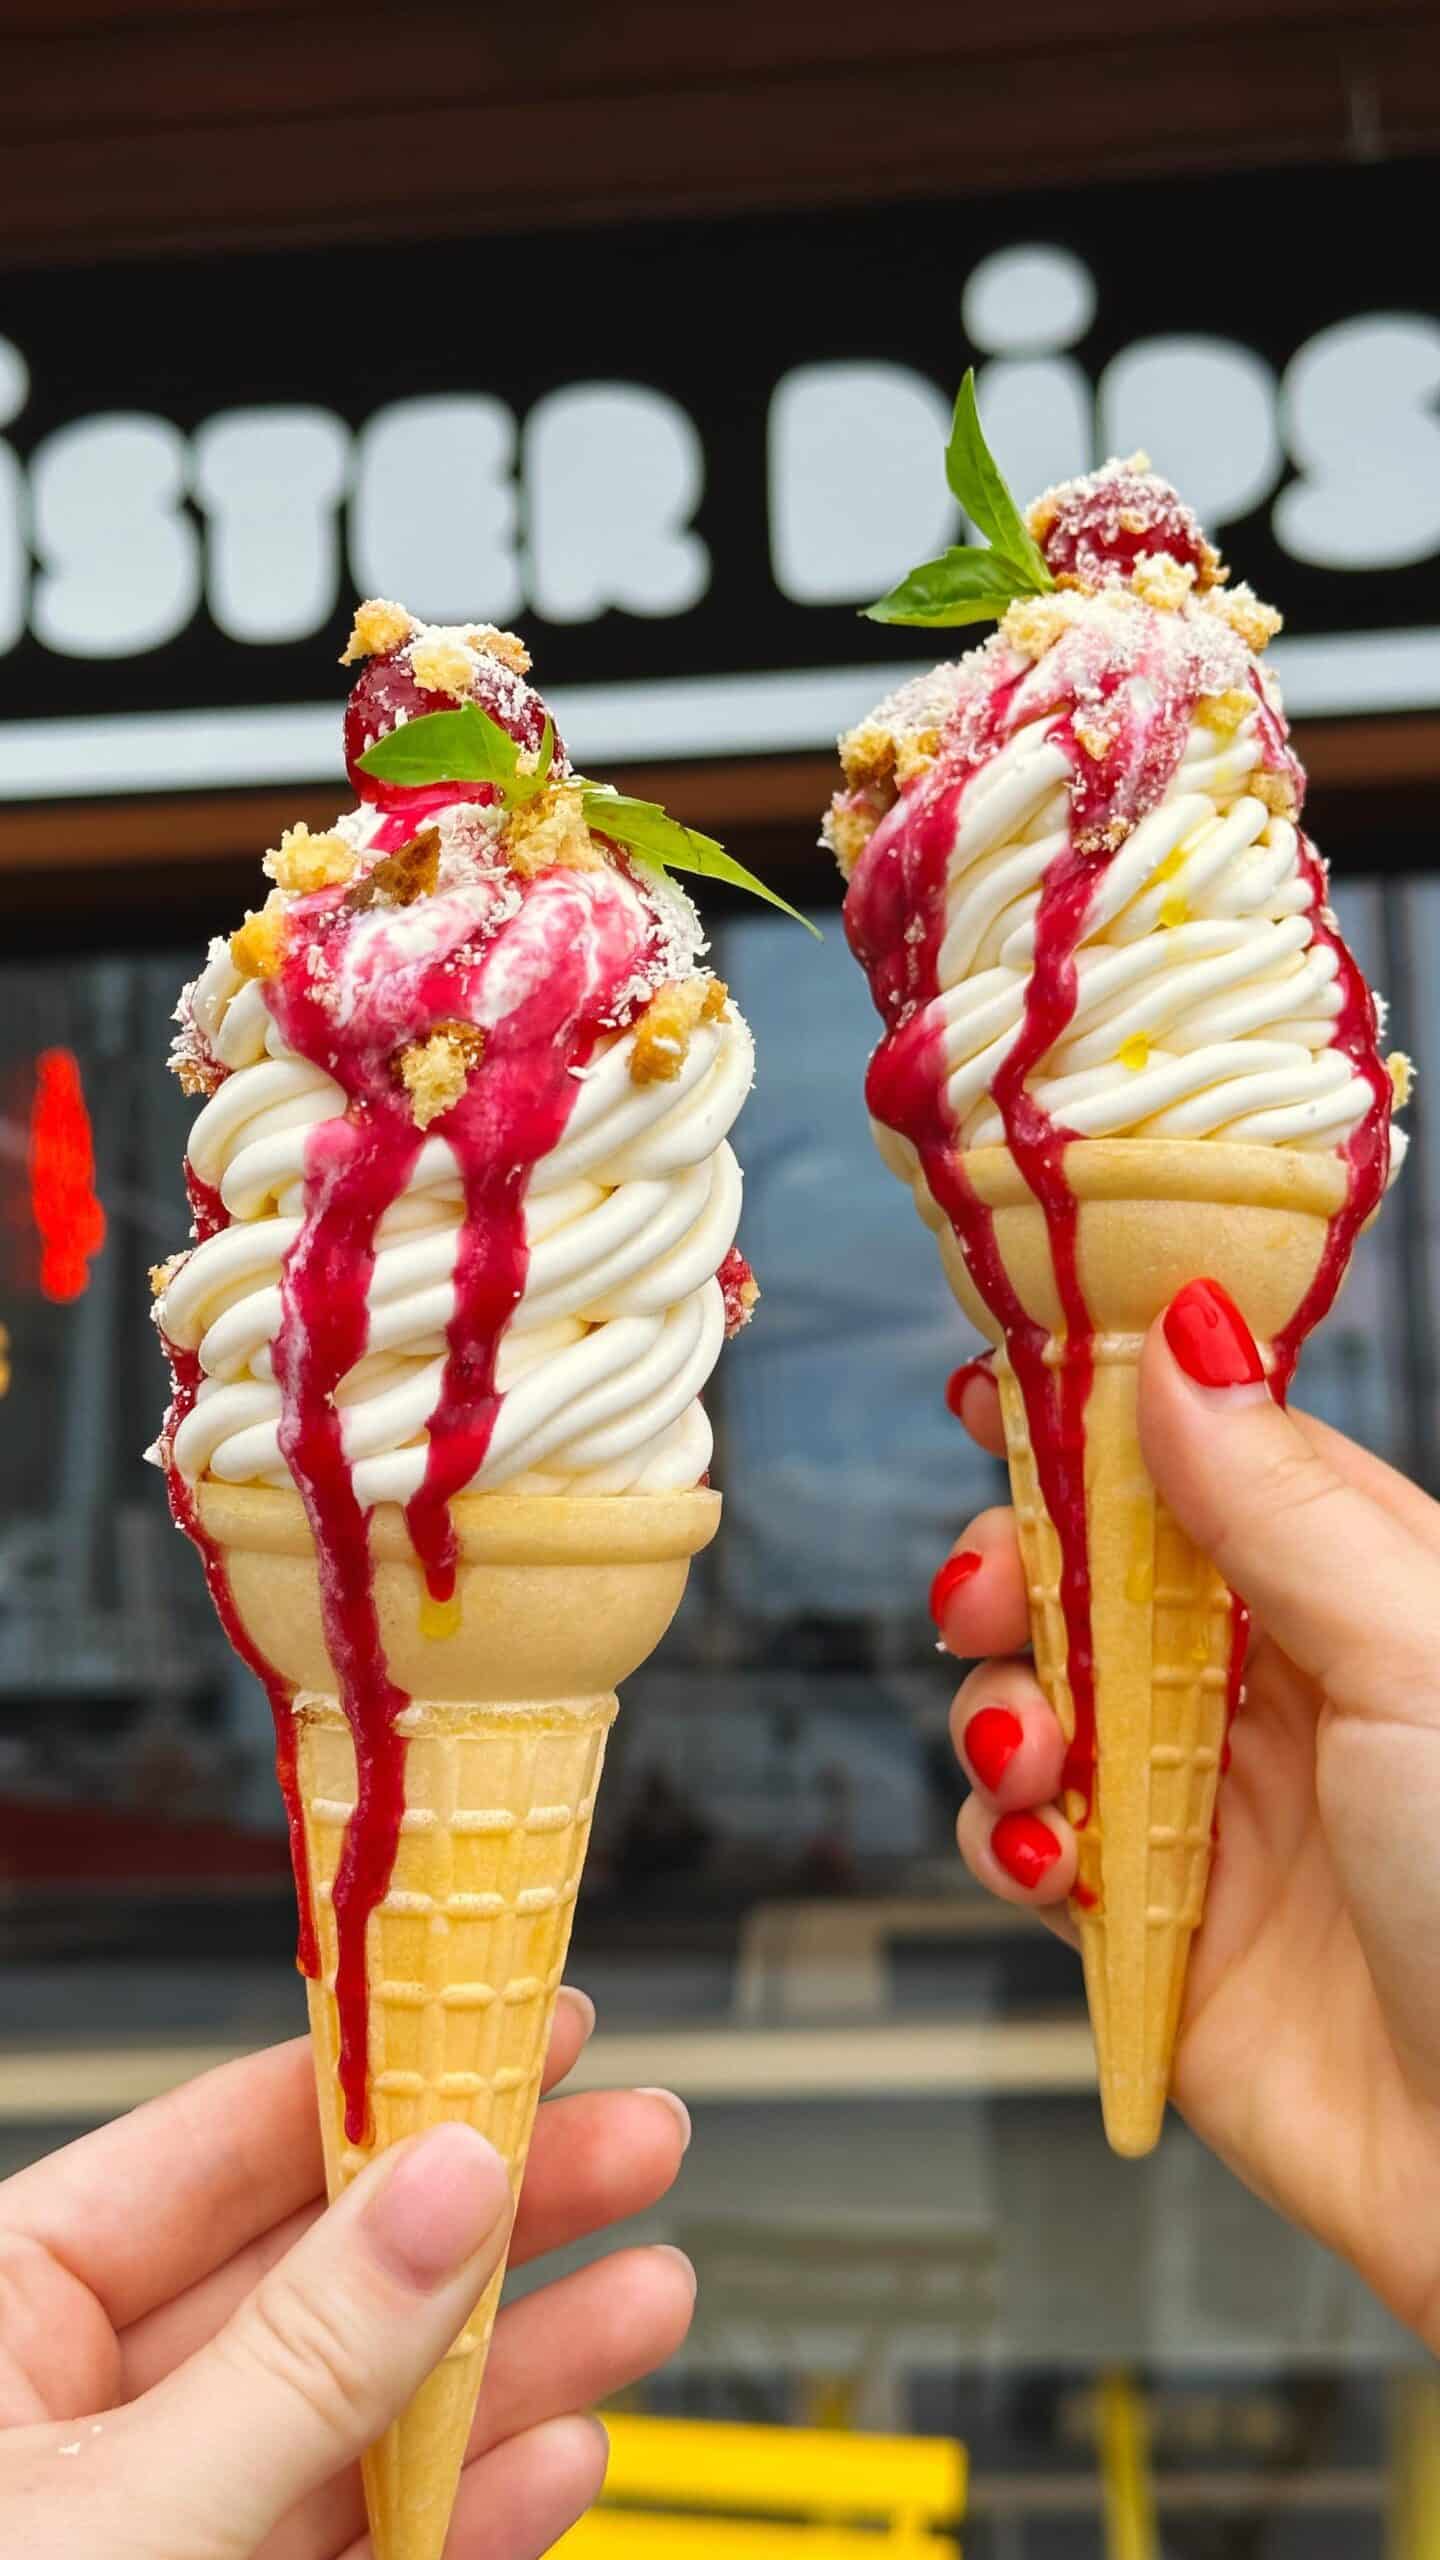 National Ice Cream Day – something to celebrate! Swing by @eatmisterdips to get a taste of their limited edition cone – The Spaghetti Dip made w/ cheesecake soft serve, berry red sauce, amaretti crumbs Available today only.